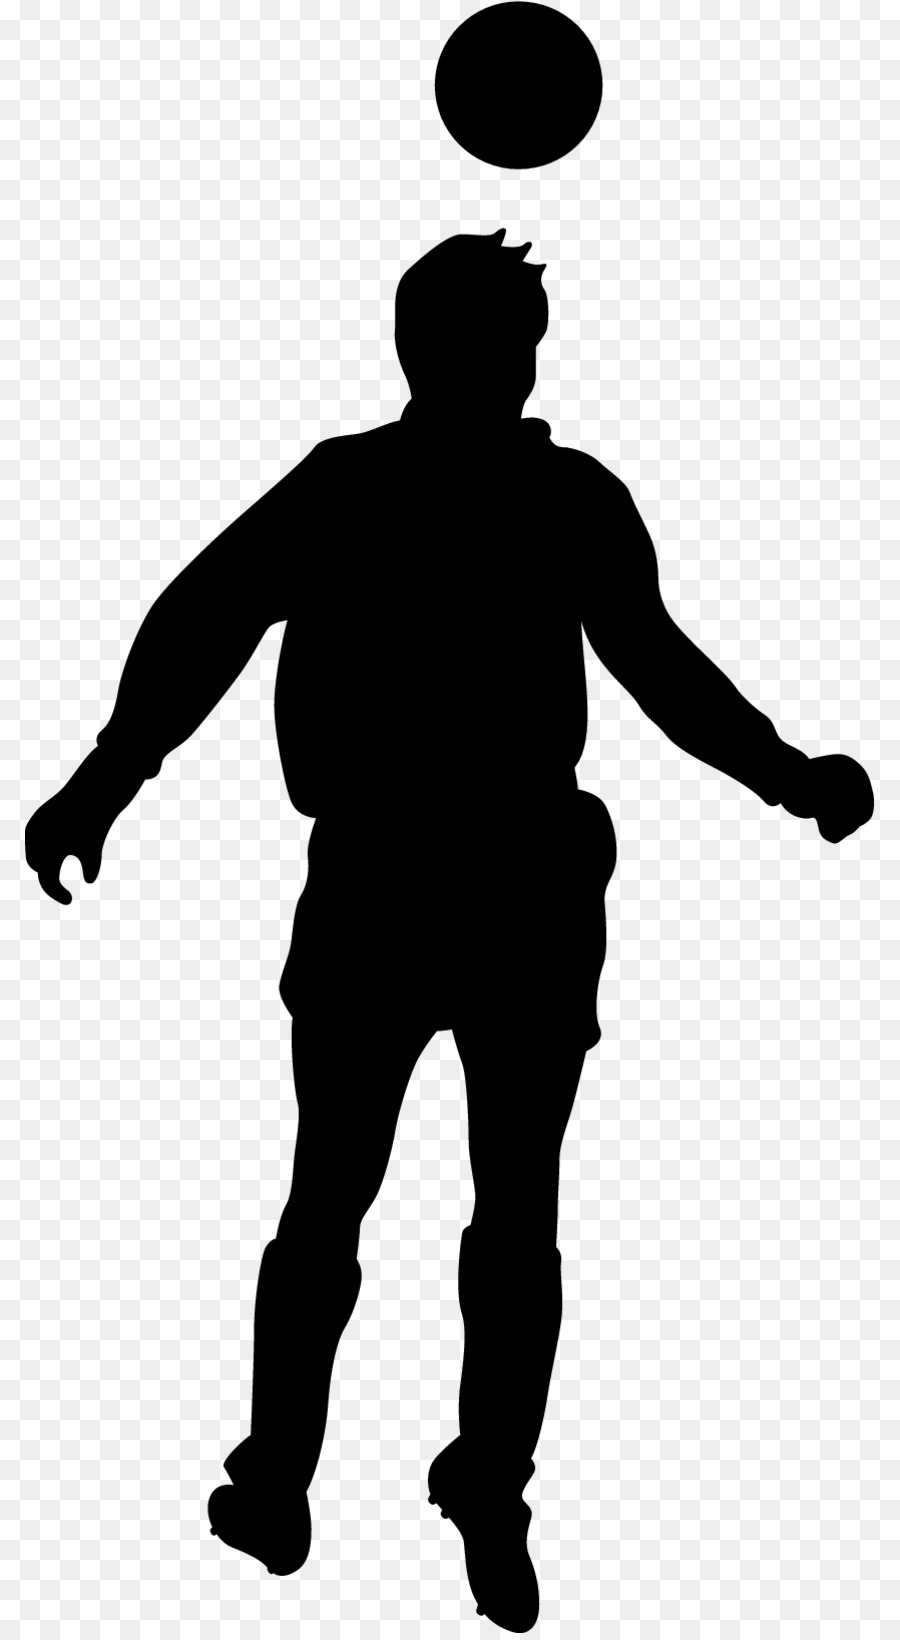 Football player Wall decal Silhouette - football png download - 850*1633 - Free Transparent Football png Download.